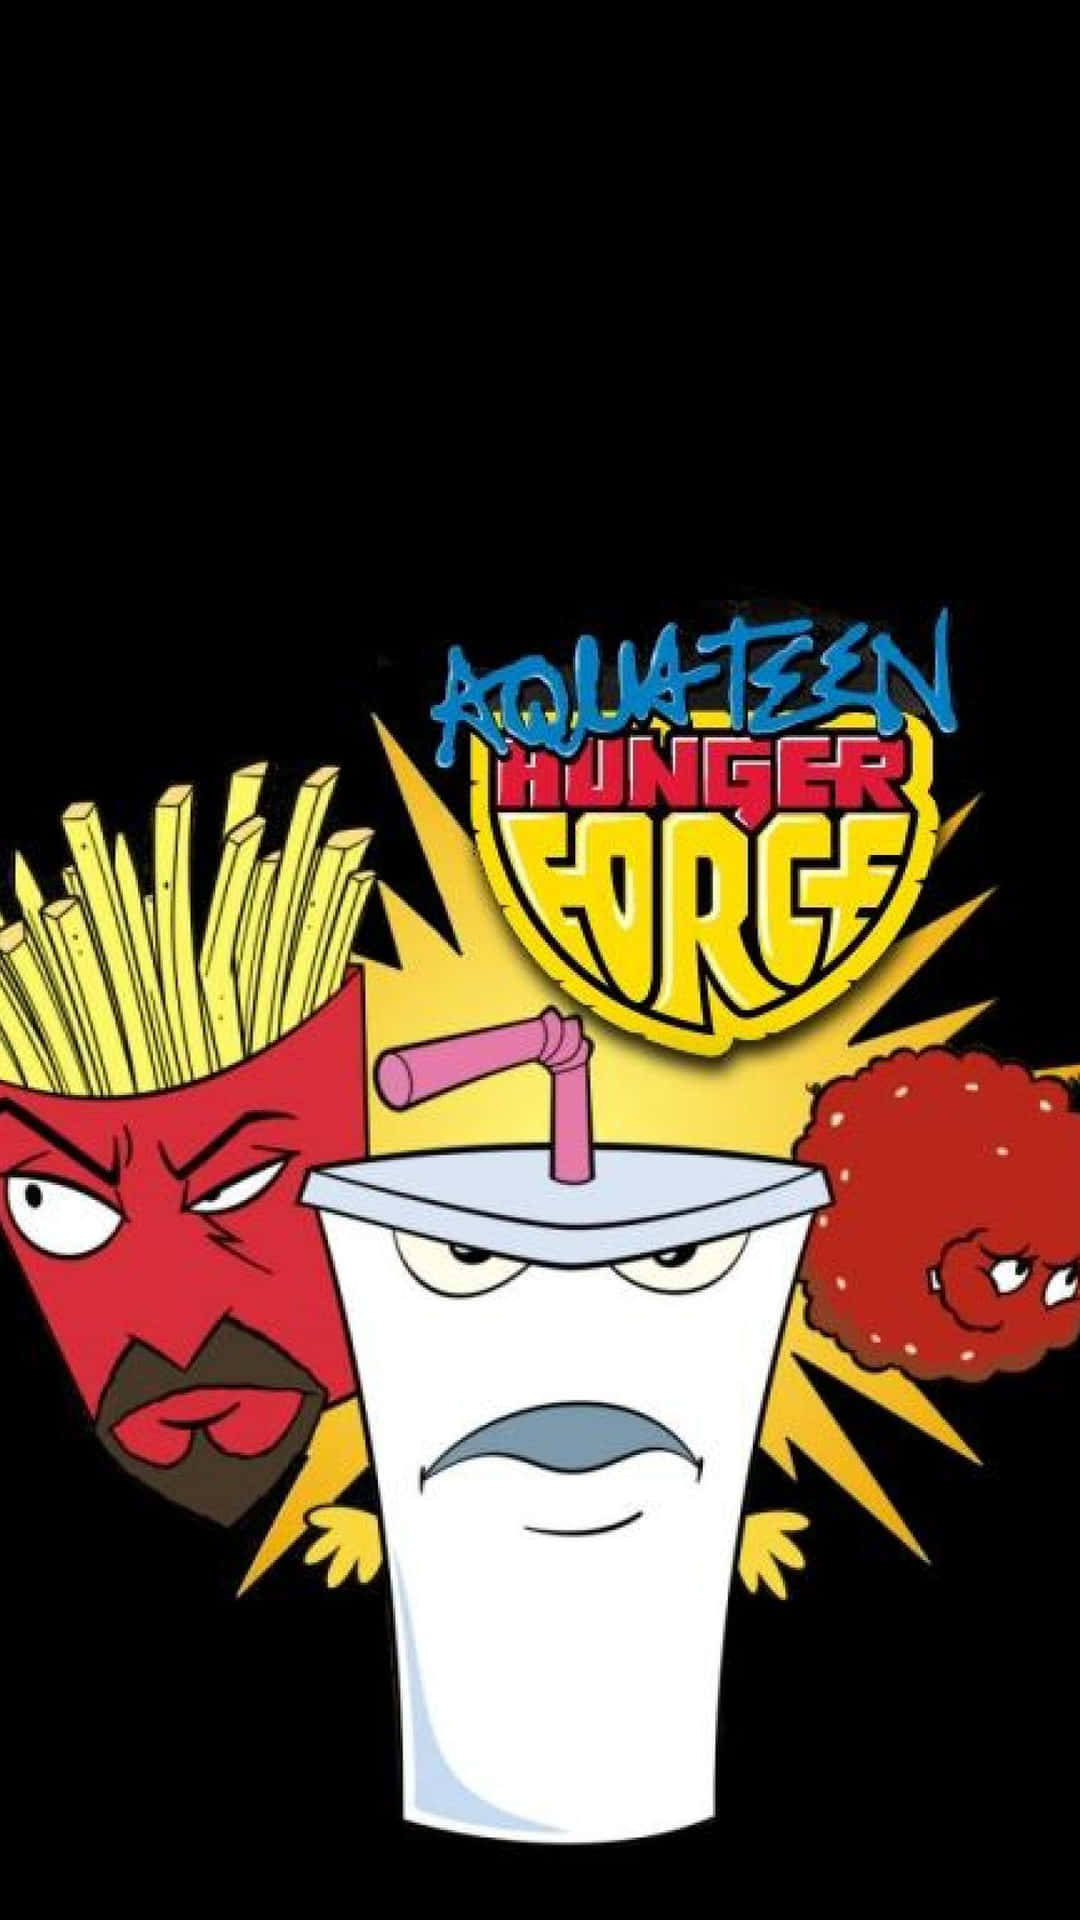 Aqua Teen Hunger Force in Action